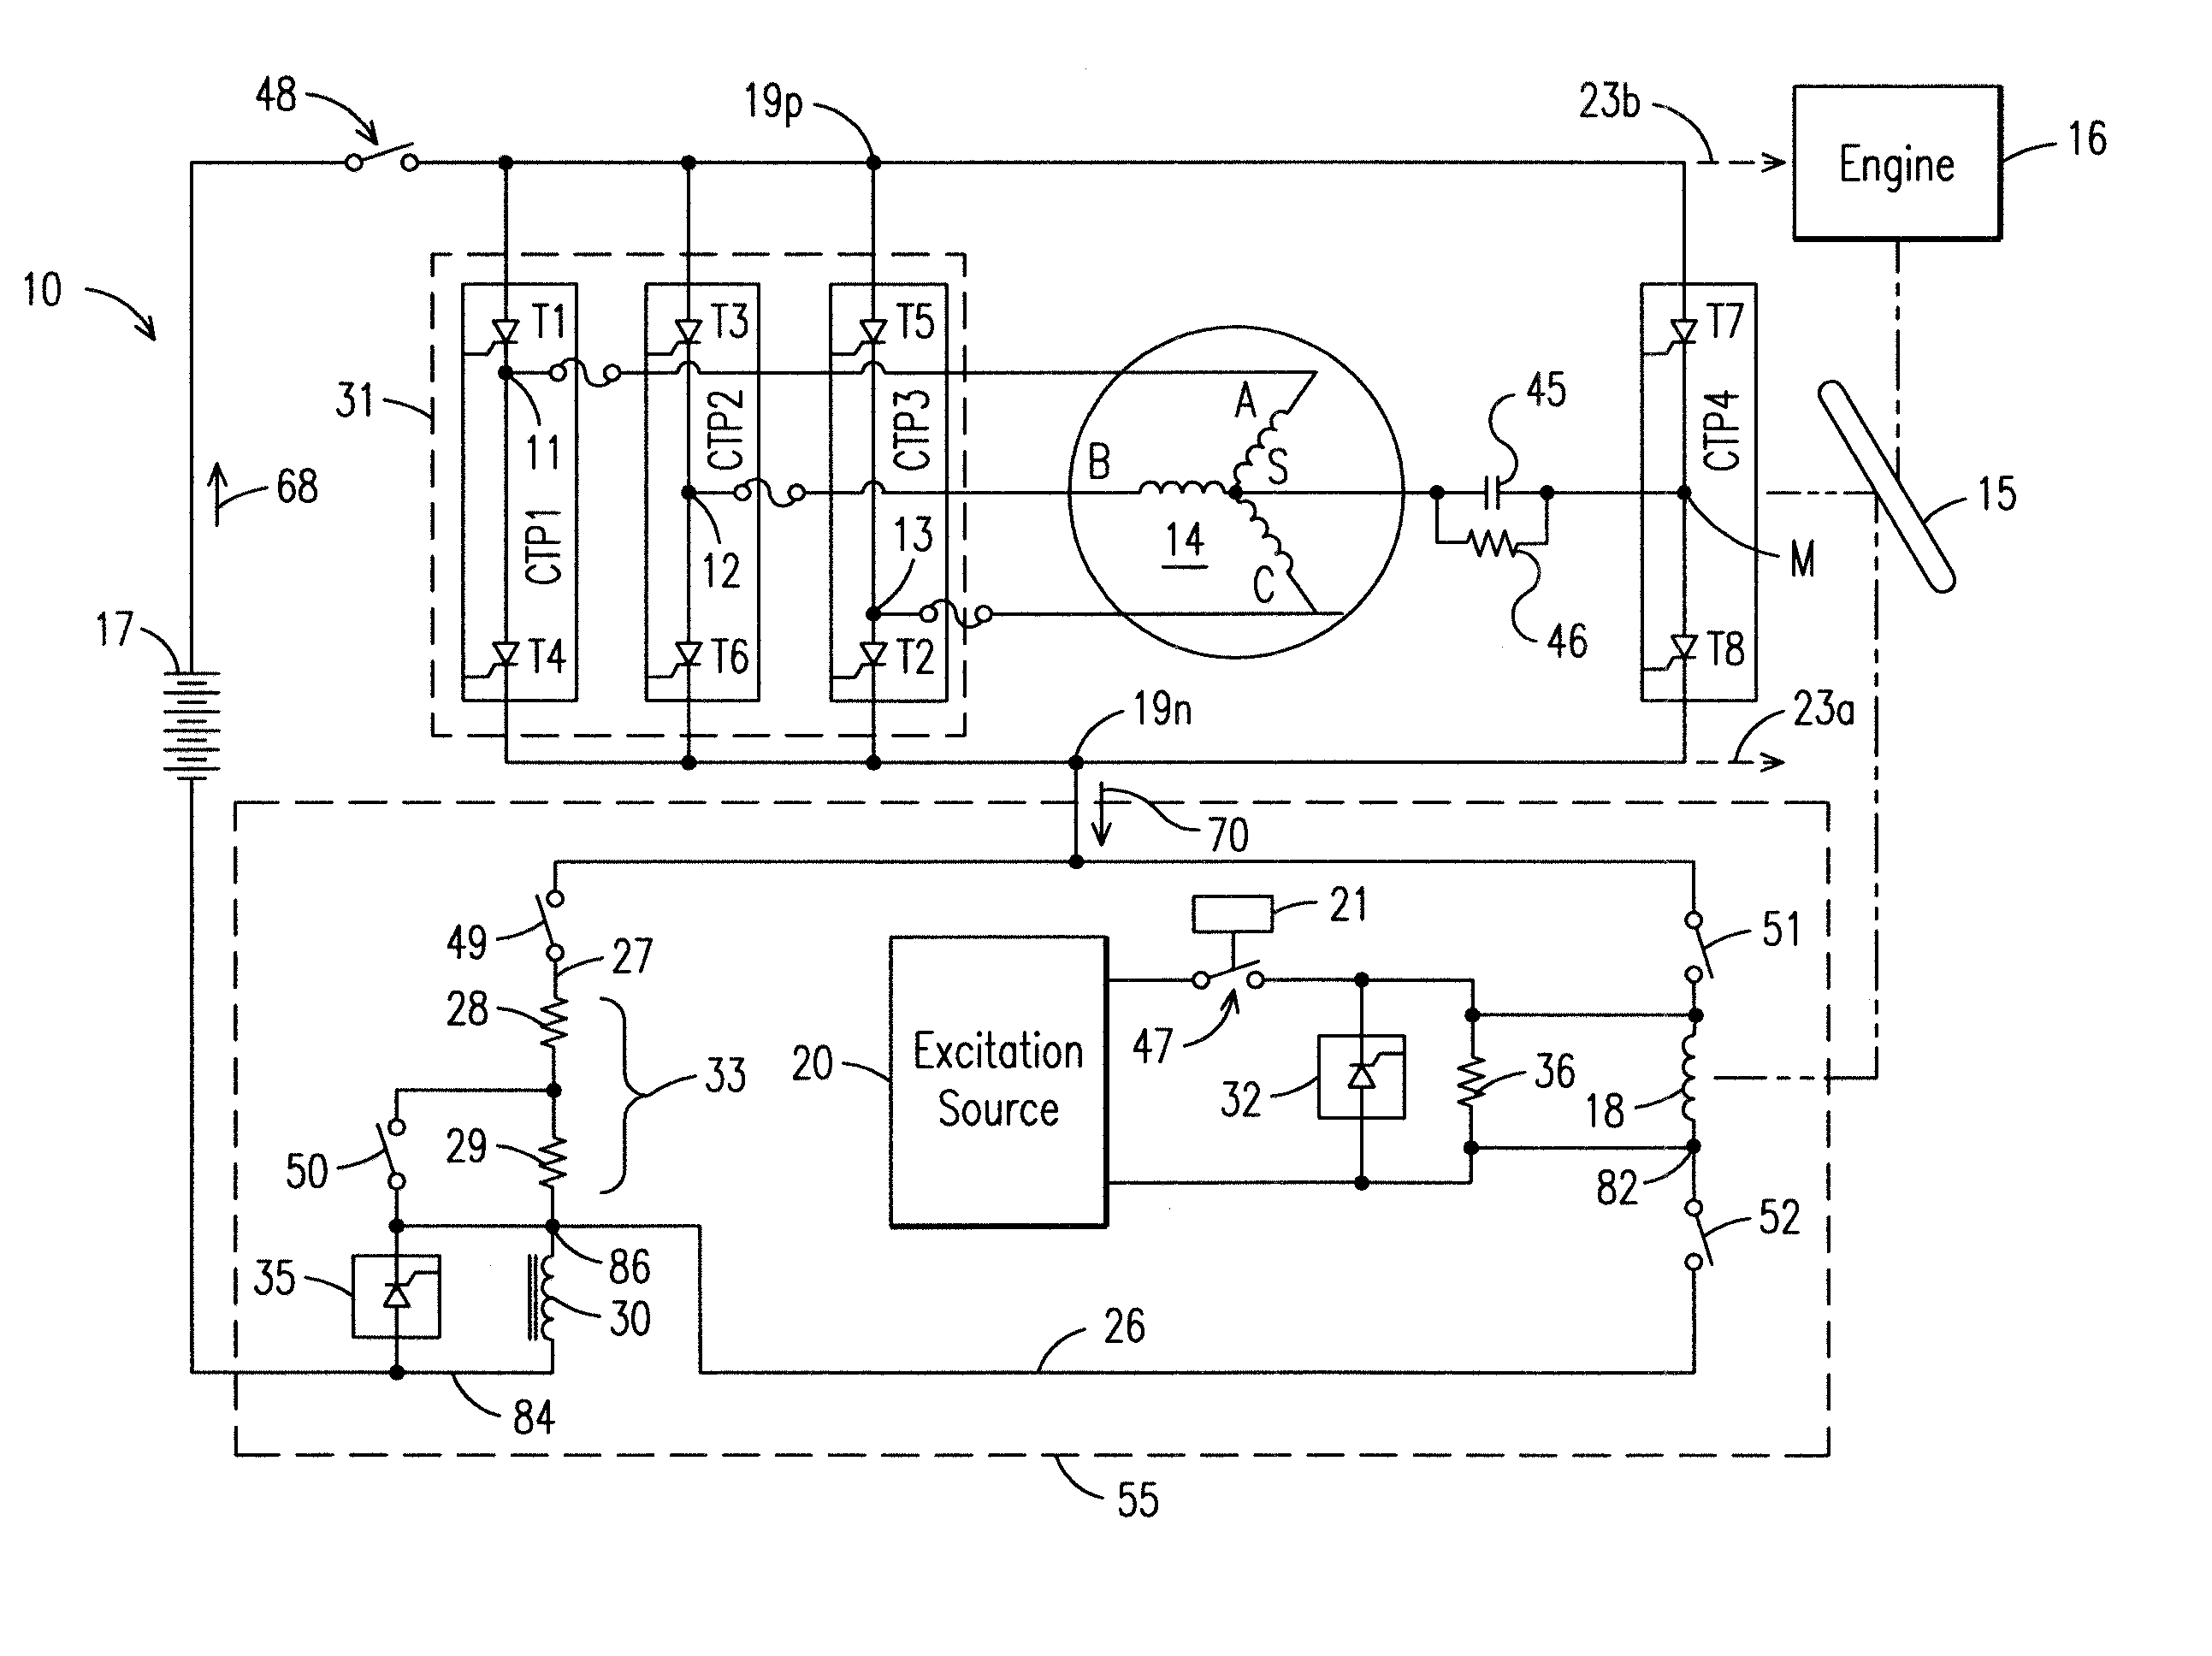 Circuit and Method for Reducing a Voltage Being Developed Across a Field Winding of a Synchronous Machine